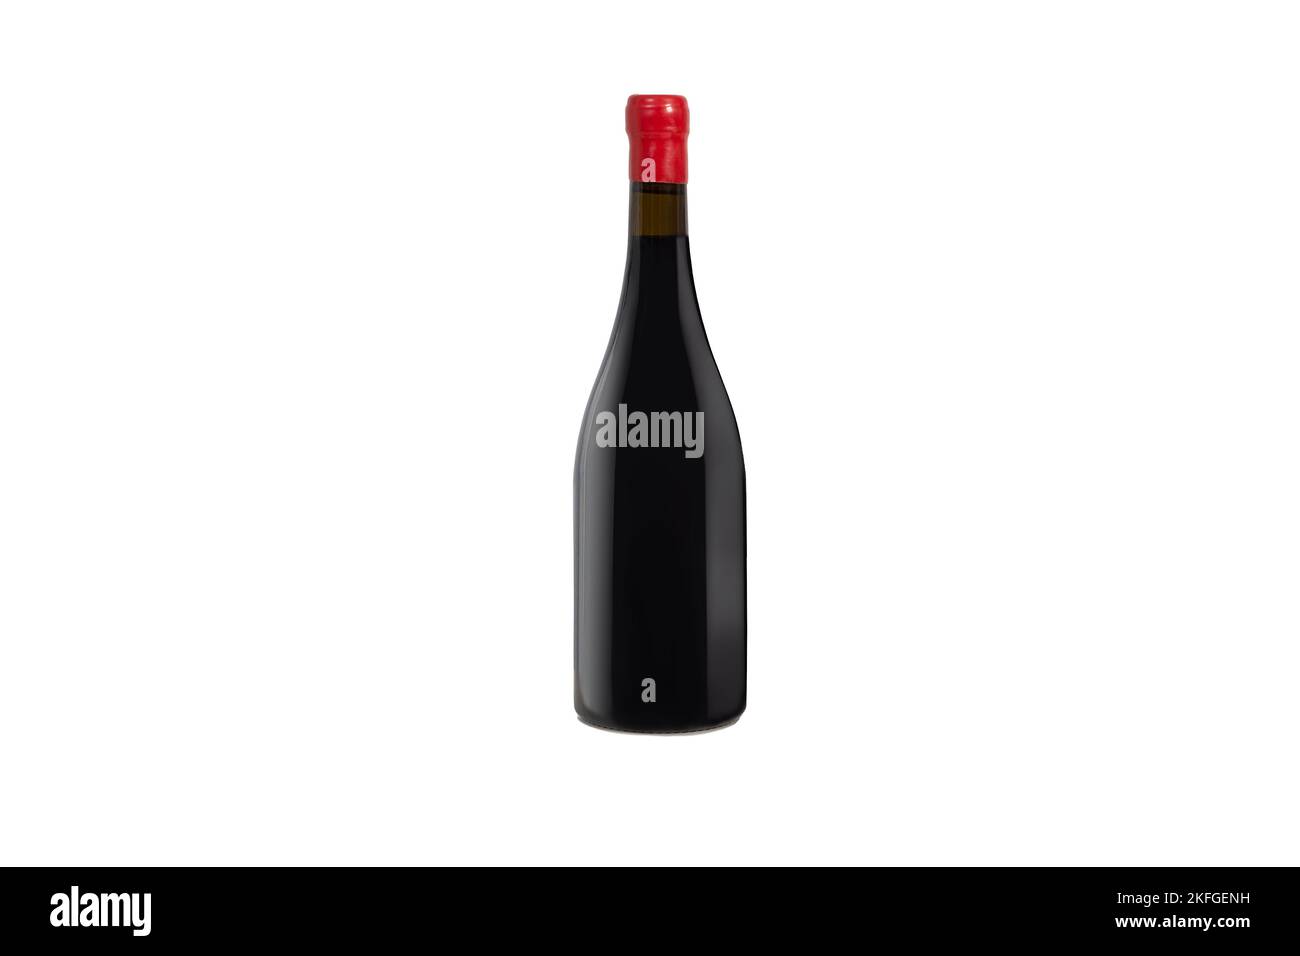 Isolated bottle of wine or champagne with a red stopper. Stock Photo